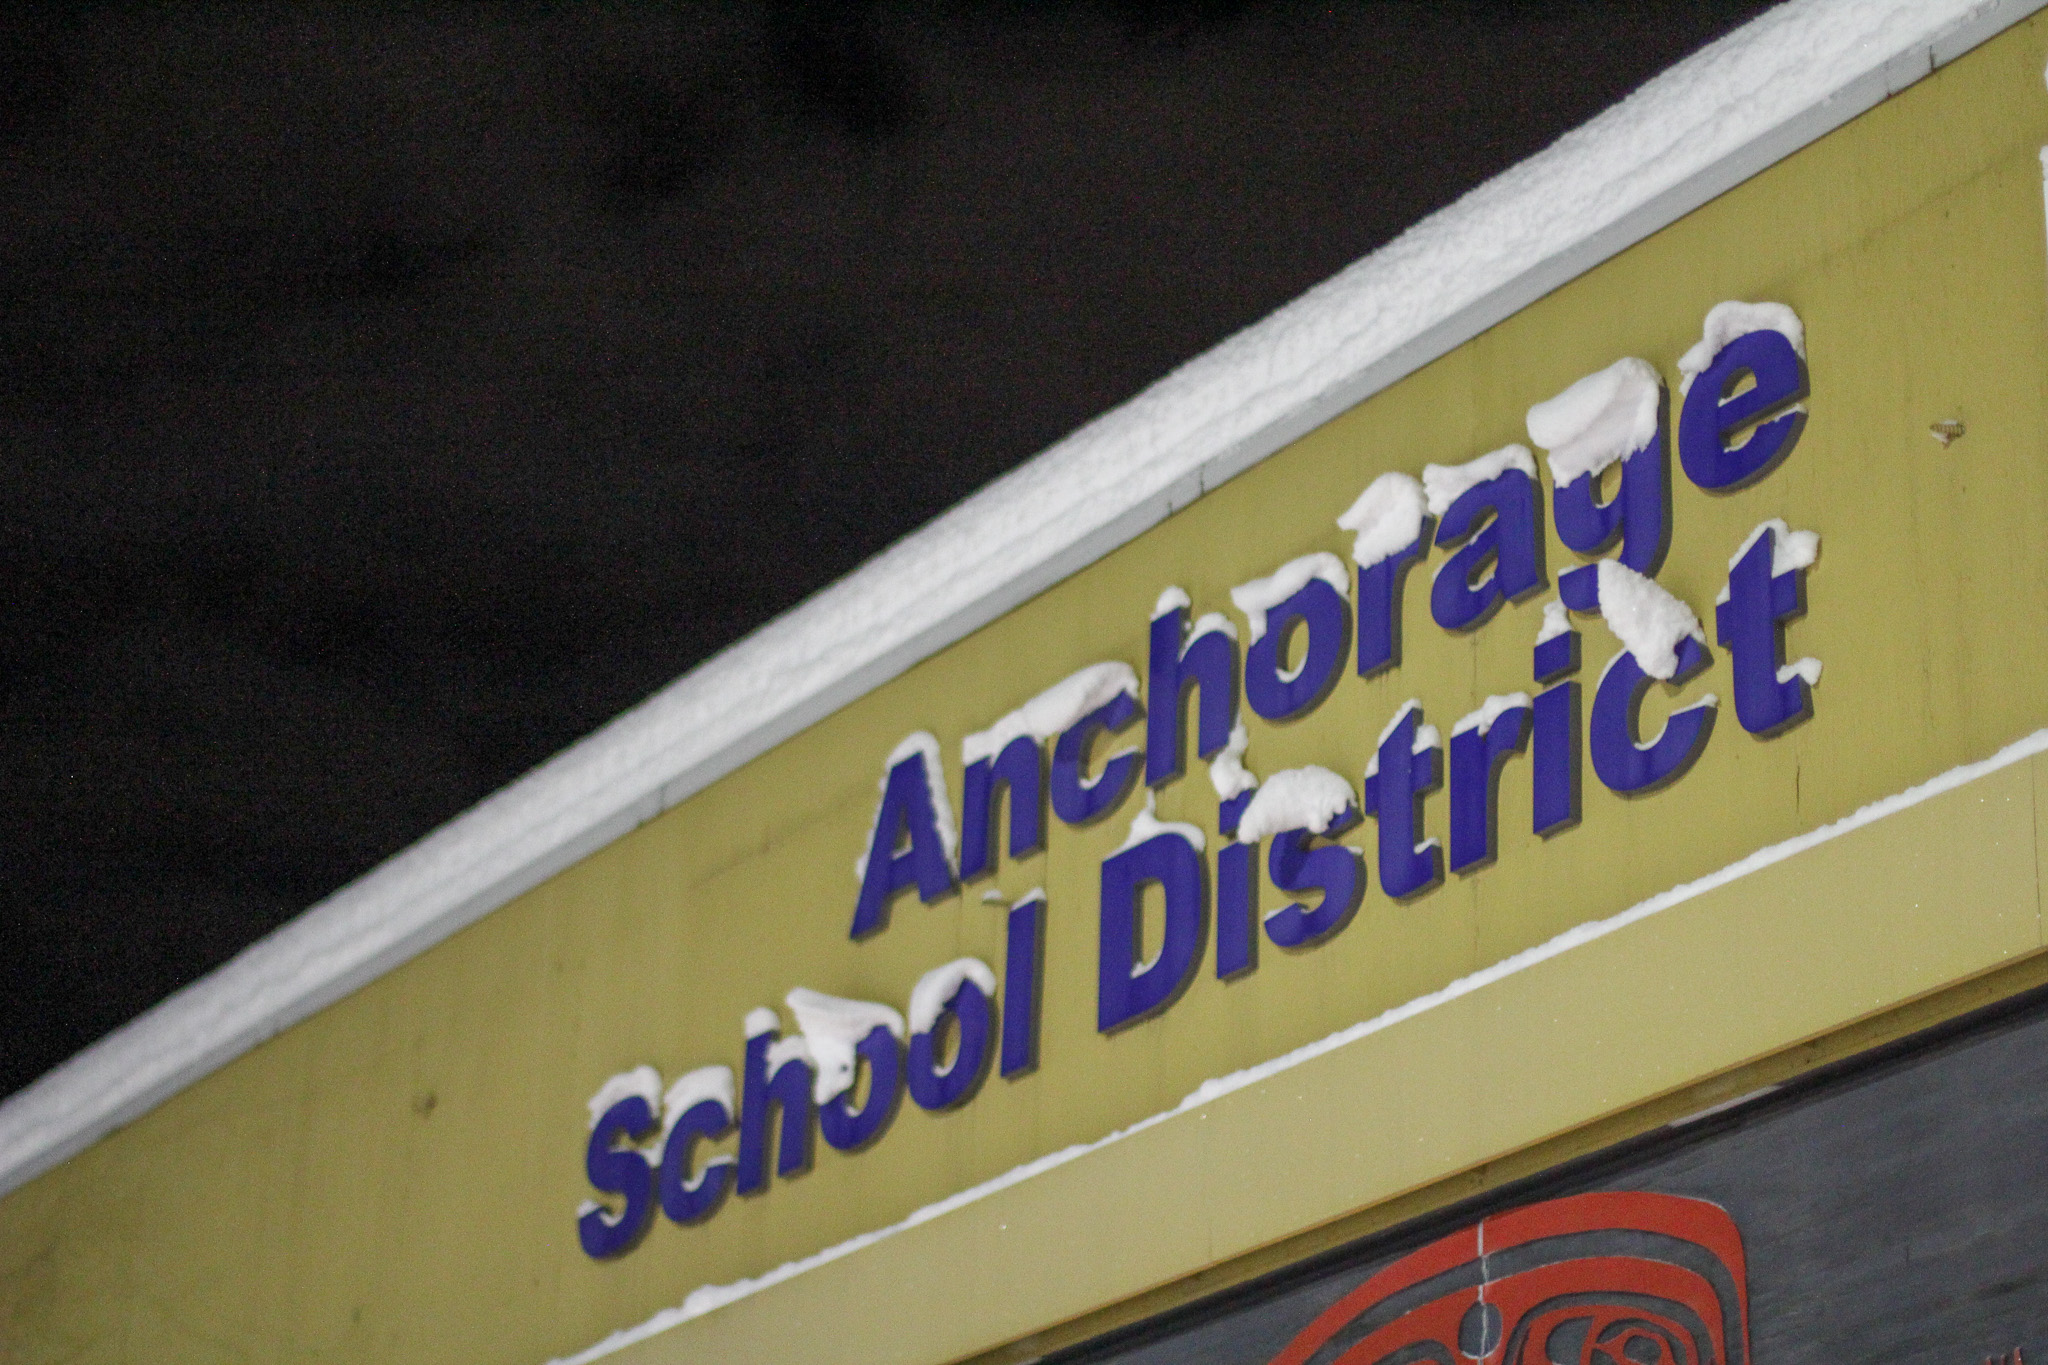 A sign displaying "Anchorage School District" with snow on the letters.